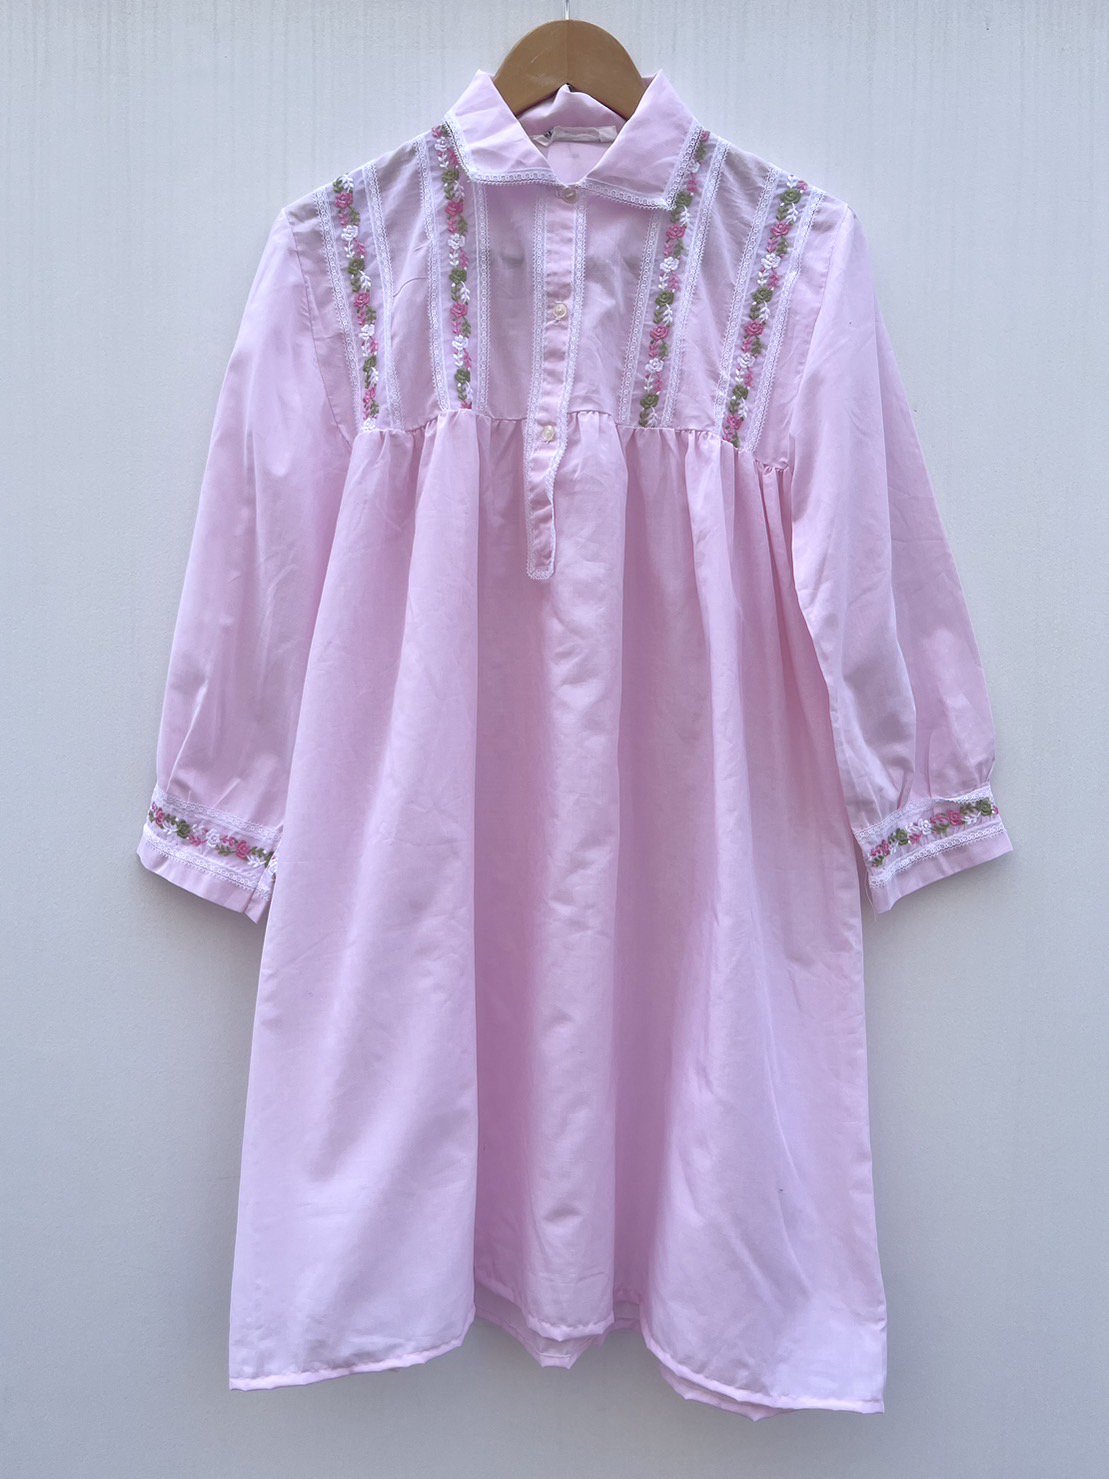 rose embroidery shirt onepiece